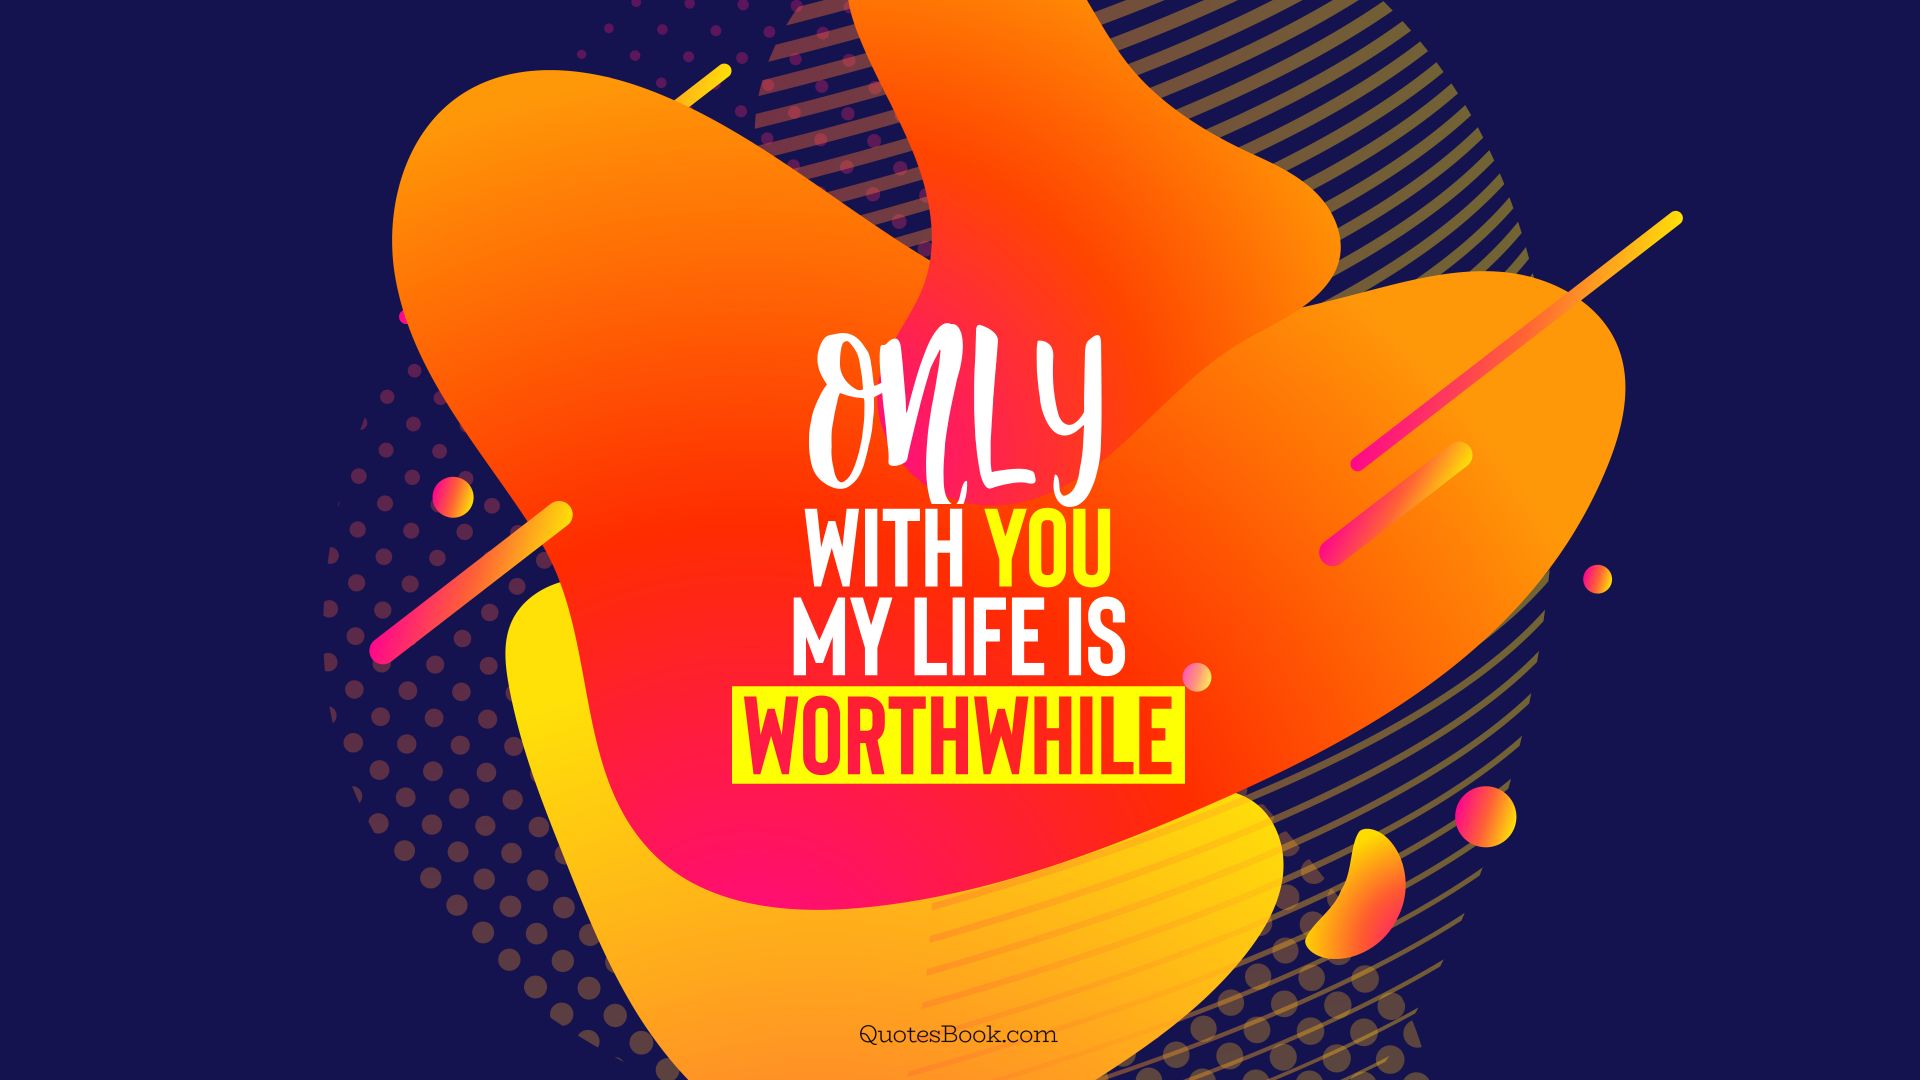 Only with you my life is worthwhile. - Quote by QuotesBook